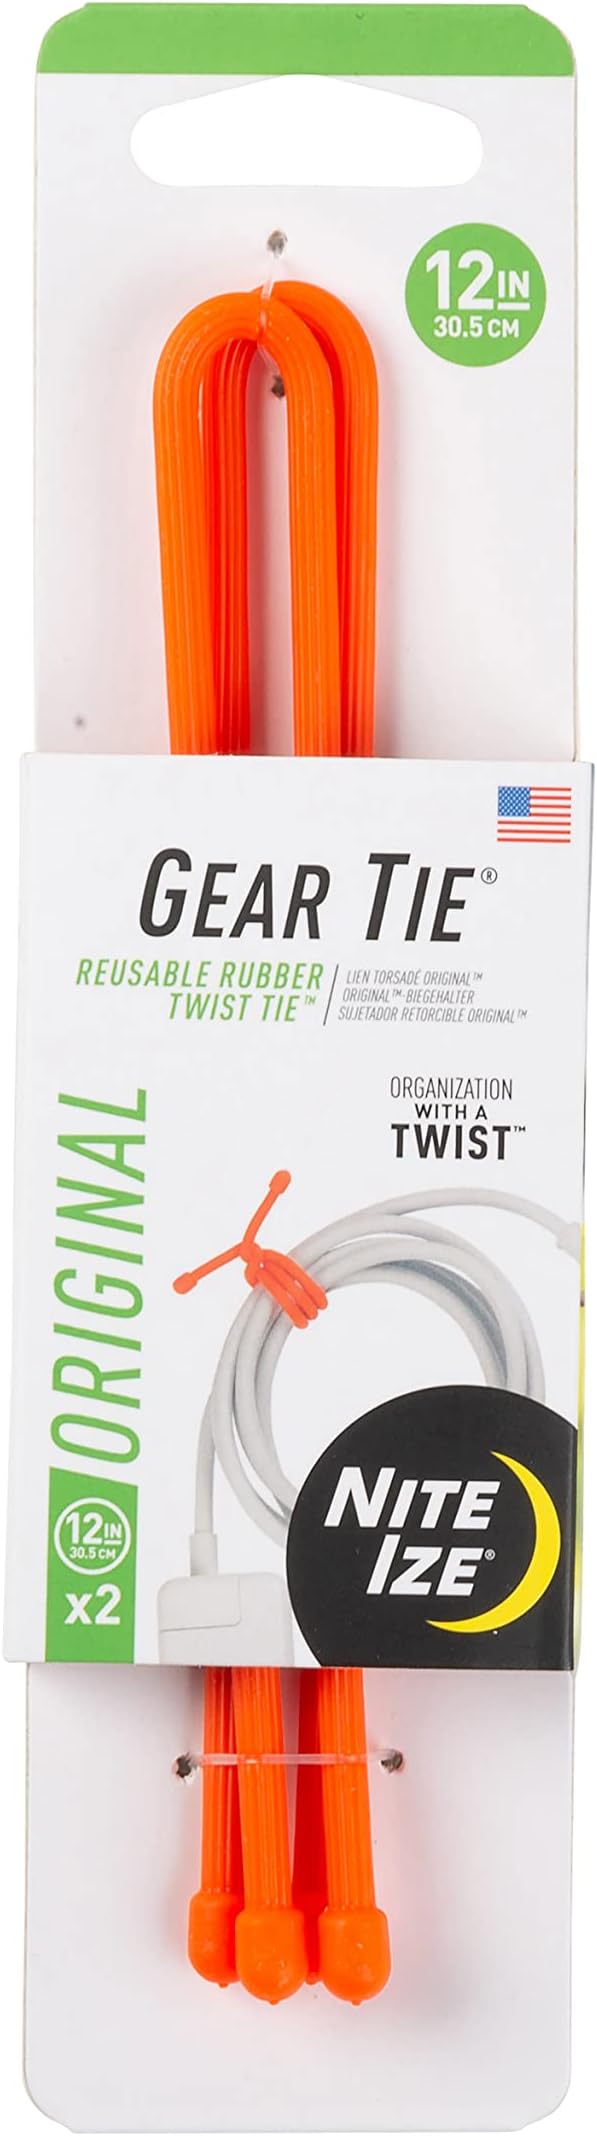 Nite Ize GT12-31-2R3 Original Gear, Reusable Rubber, 12 Inch, 2-Pack, Bright Orange, Made in The USA Twist Tie, 2 Count (Pack of 1)